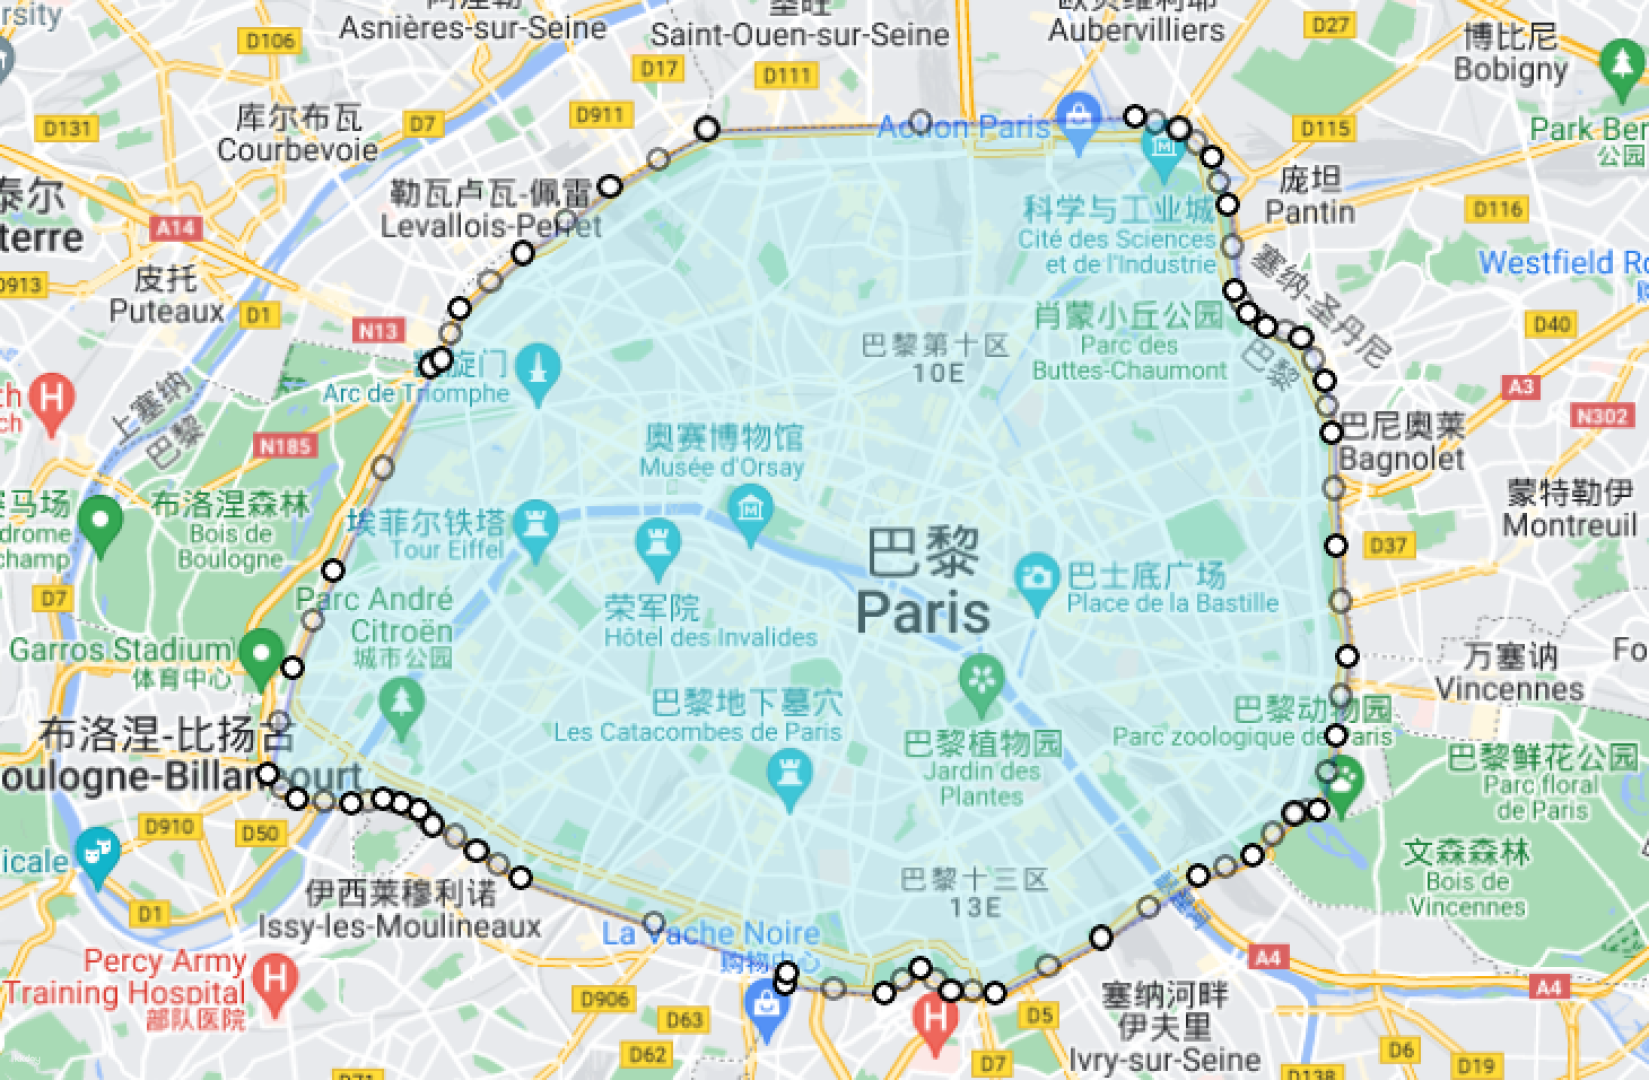 [Exclusive chartered car] Customized one-day tour of the Eiffel Tower, Arc de Triomphe, Champs-Elysées, Notre Dame Cathedral in Paris, France with Chinese-speaking driver